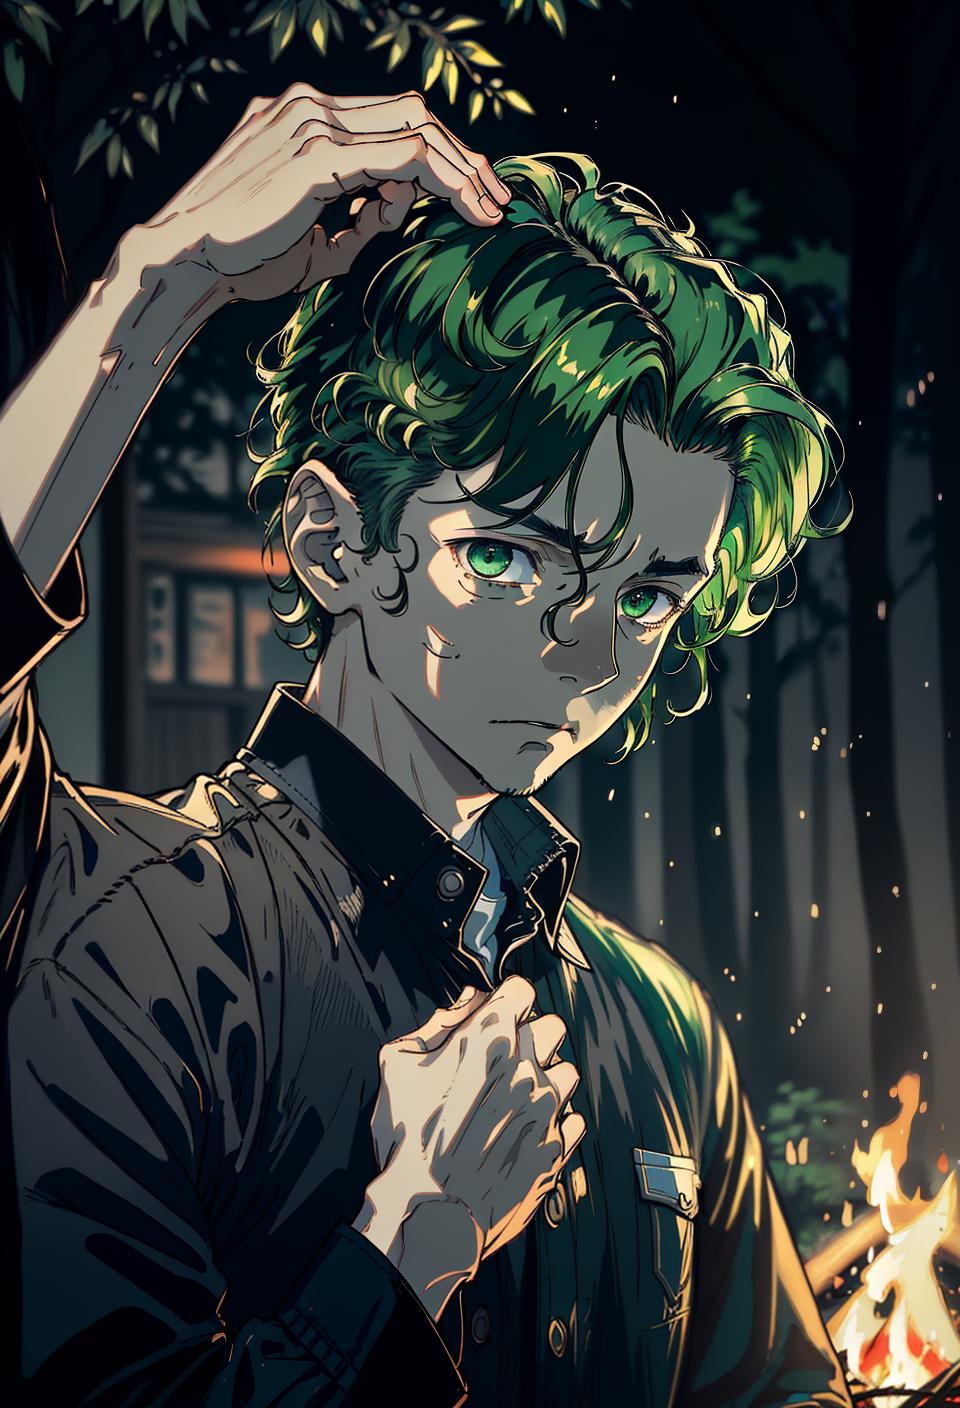  ((trending, highres, masterpiece, cinematic shot)), 1boy, mature, male casual wear, campfire scene, short wavy dark green hair, side locks hairstyle, narrow dark eyes, dumb, airheaded personality, scared expression, grey skin, orderly, clever